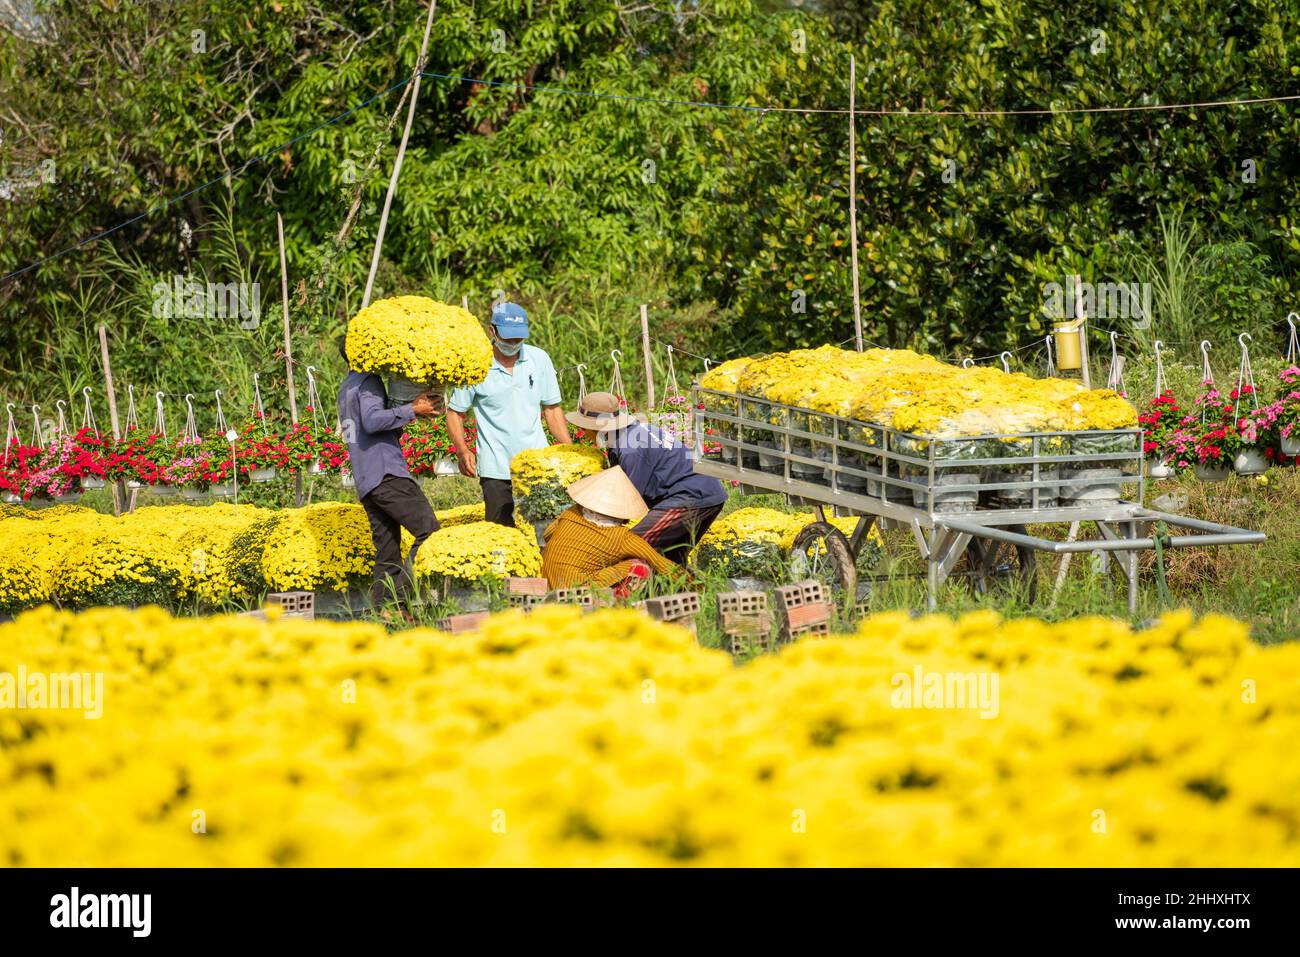 Royalty high quality free stock image. Farmers are taking care of flower baskets to prepare for sale during the Vietnamese Lunar New Year festival Stock Photo